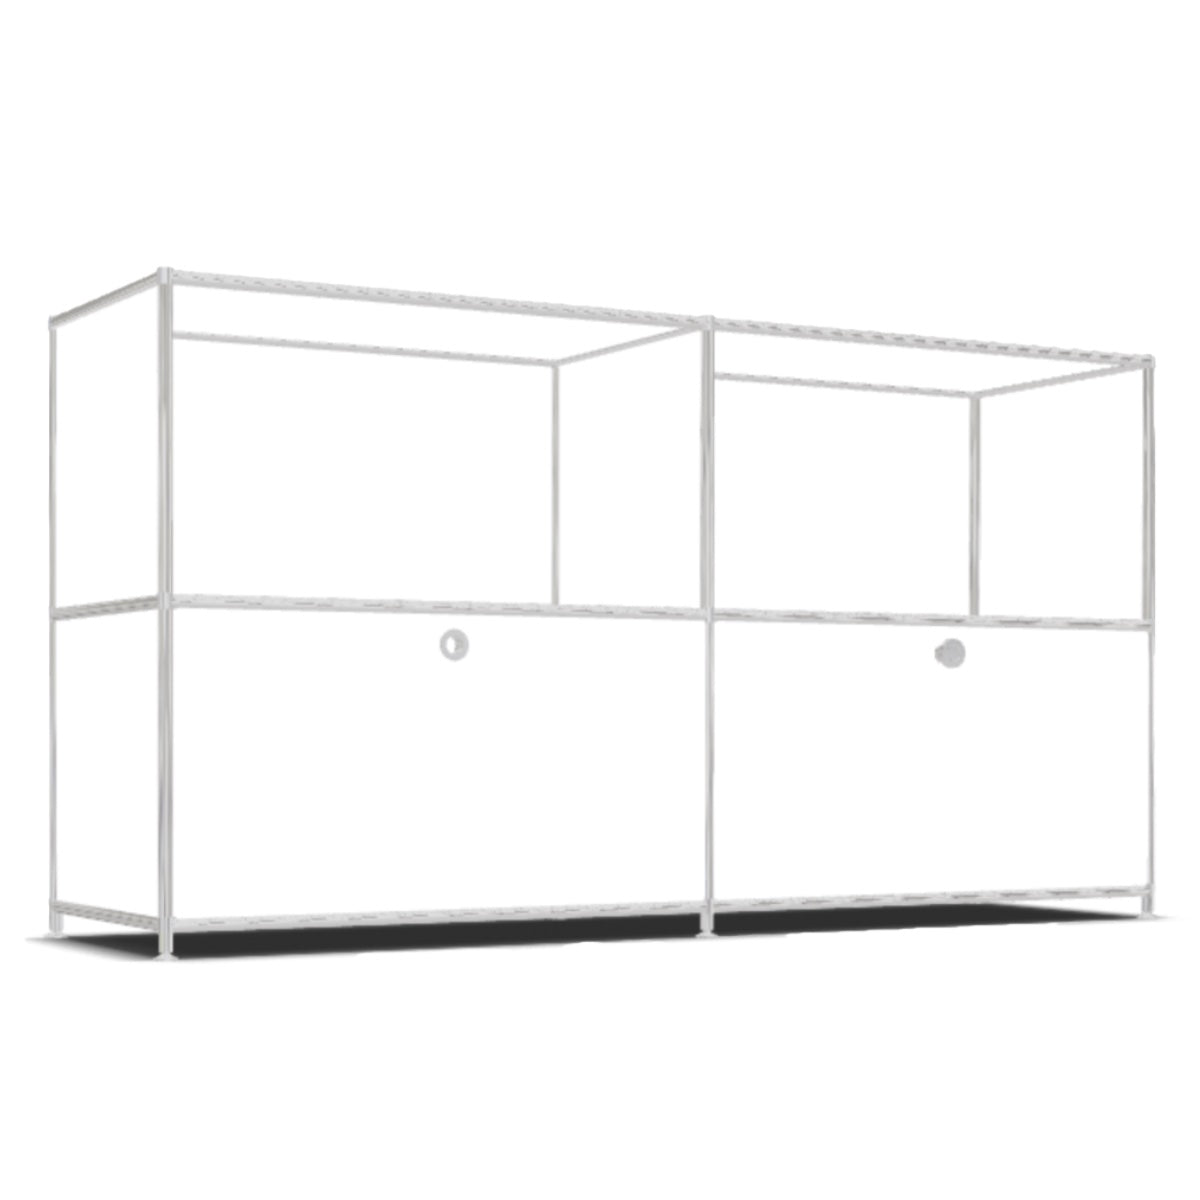 System4 Sideboard with Drawers, 153 x 80 x 40 cm, White